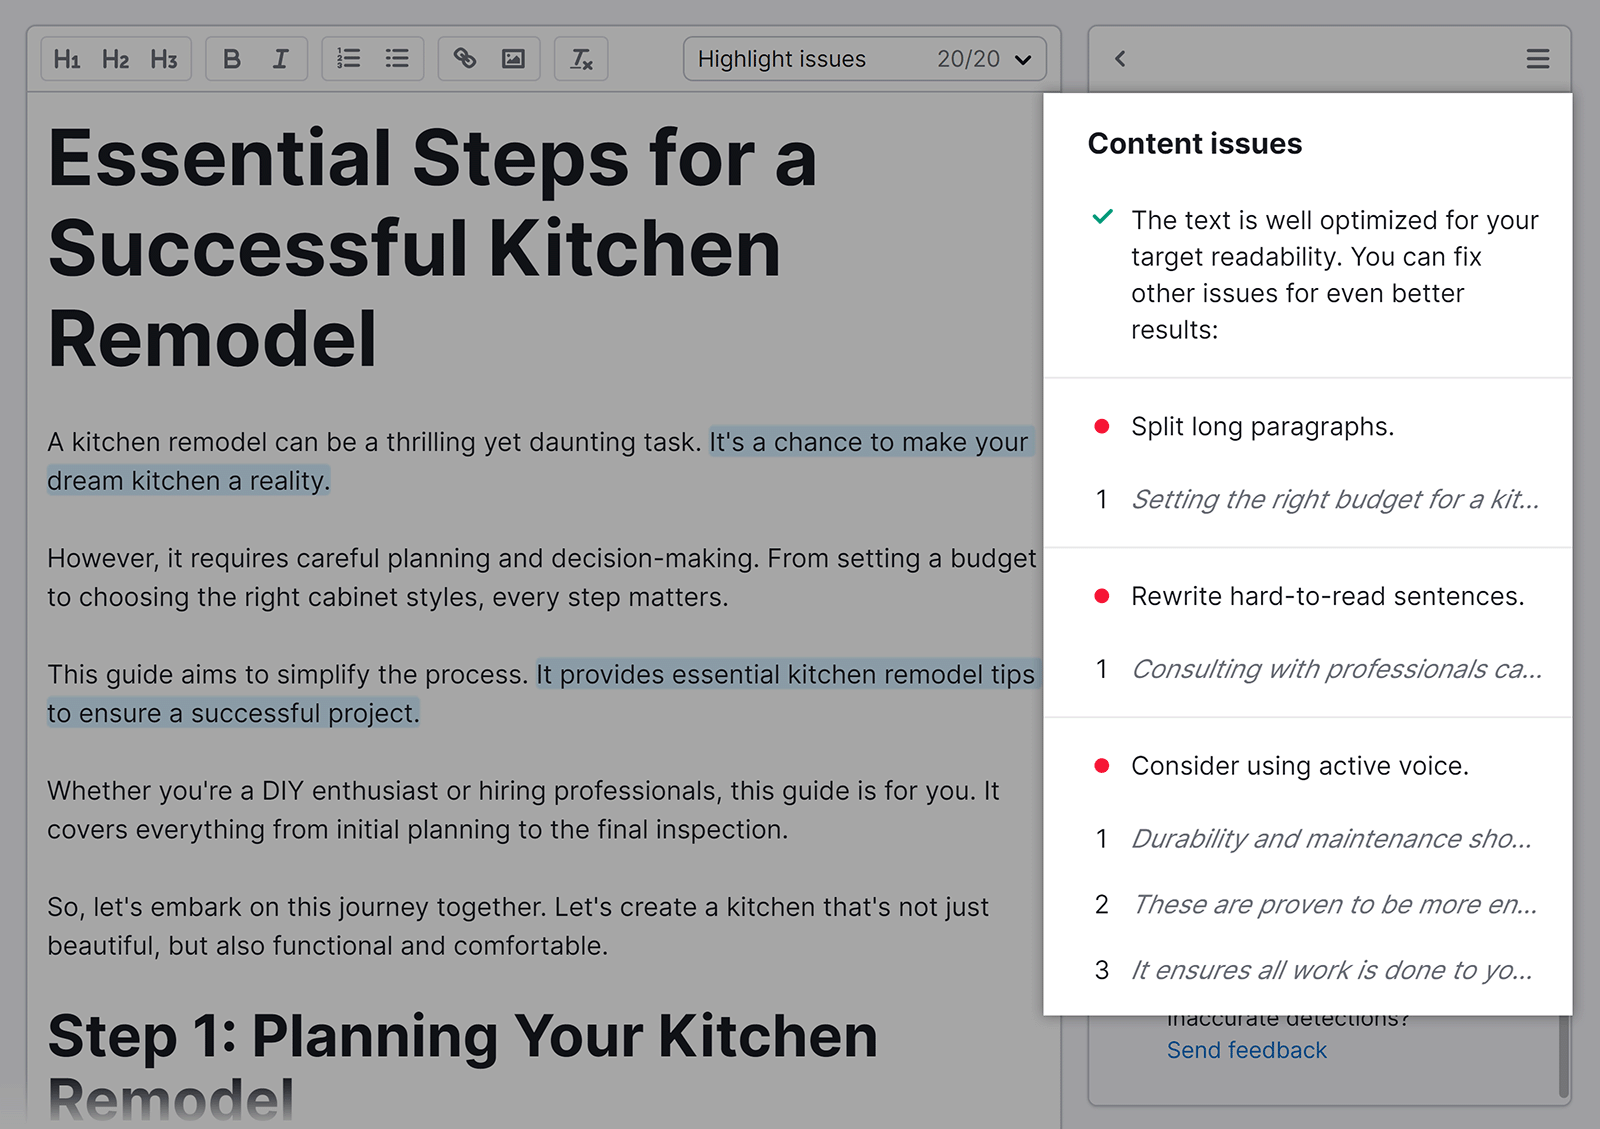 Content issues in sidebar highlighted.